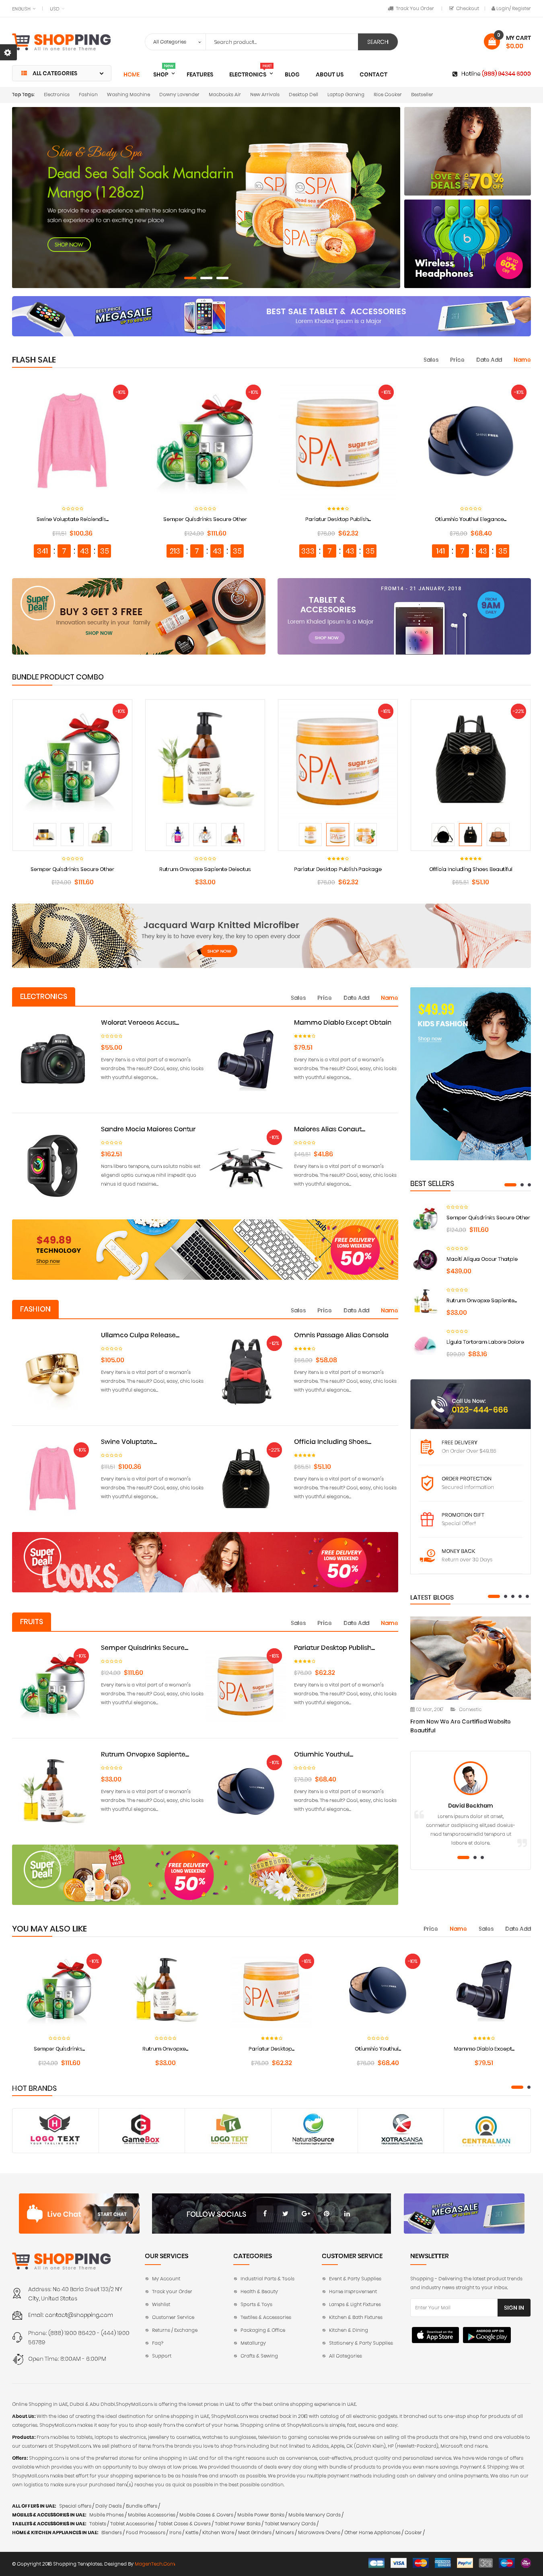 Shopping - Clean Multipurpose Responsive PrestaShop 1.7 eCommerce Theme - Top Prestashop themes for large inventory stores